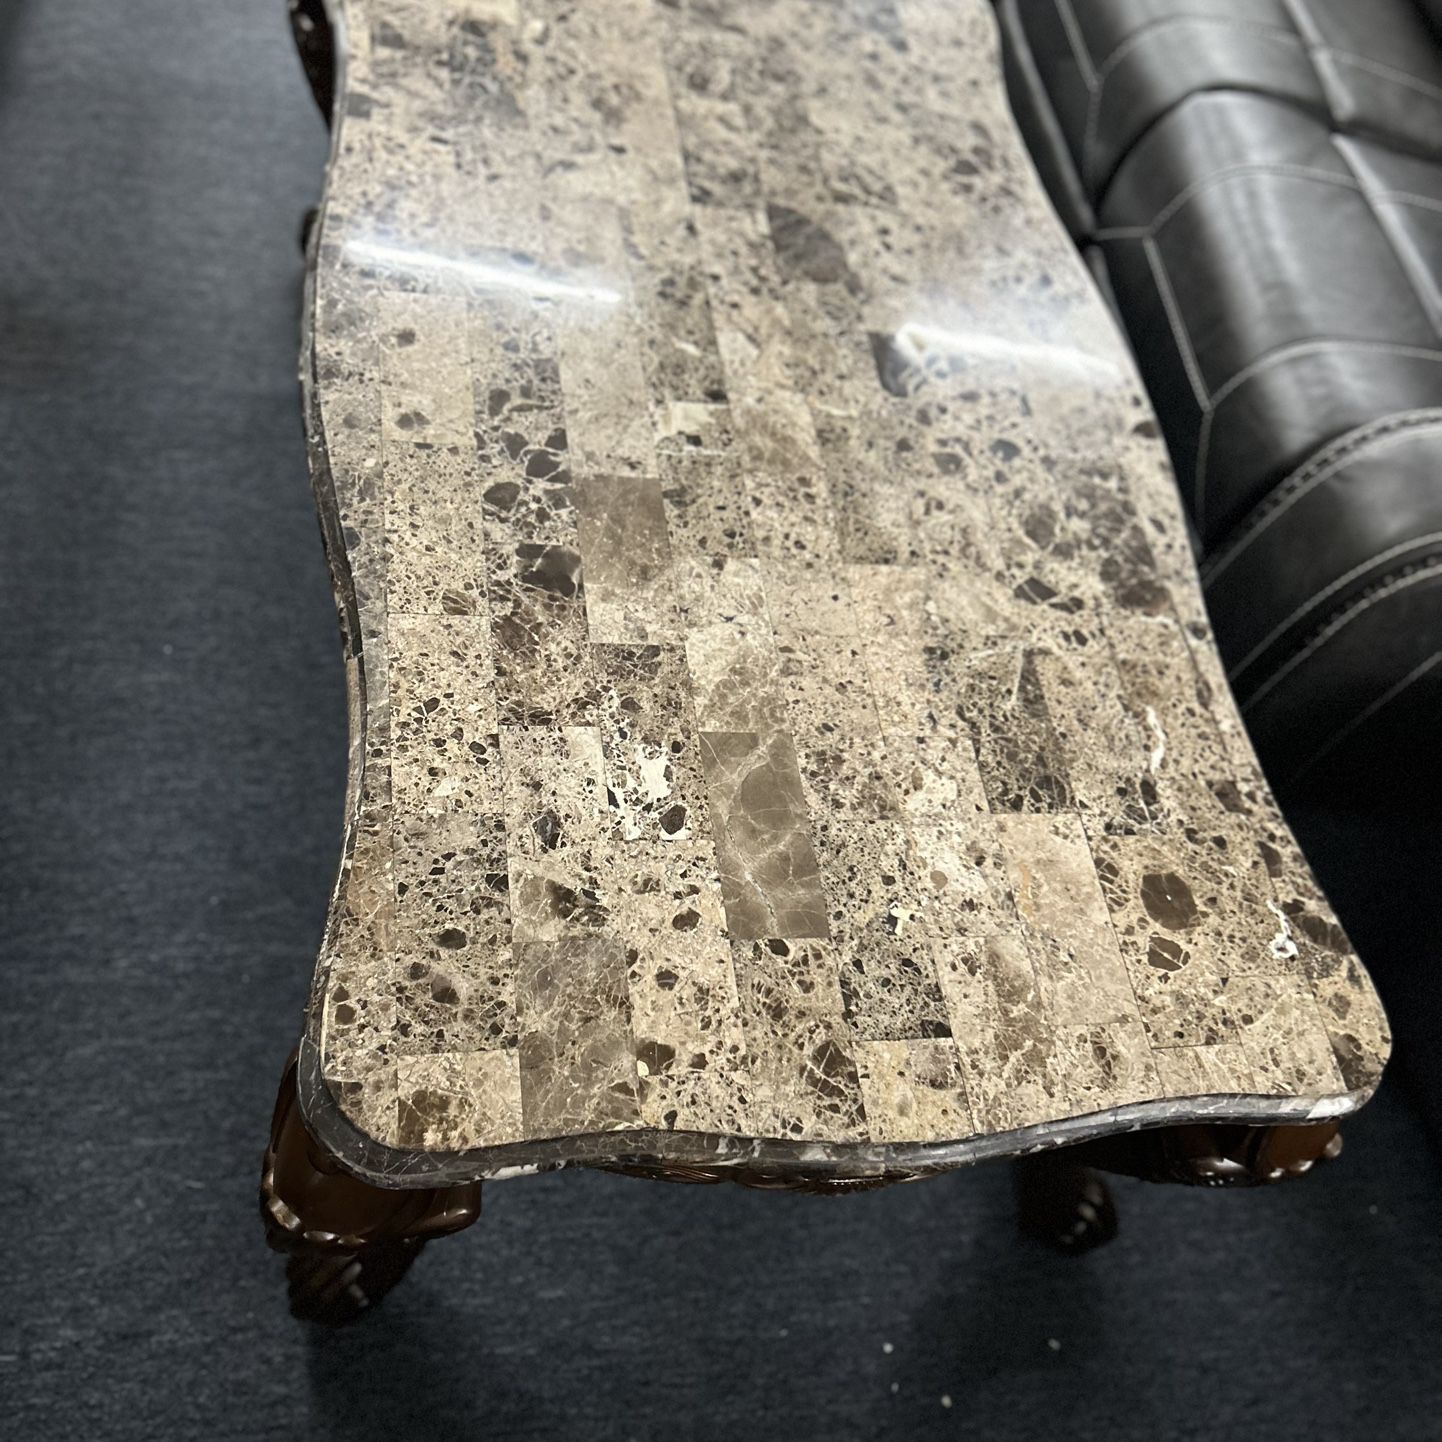 Real Marble Coffee Table 